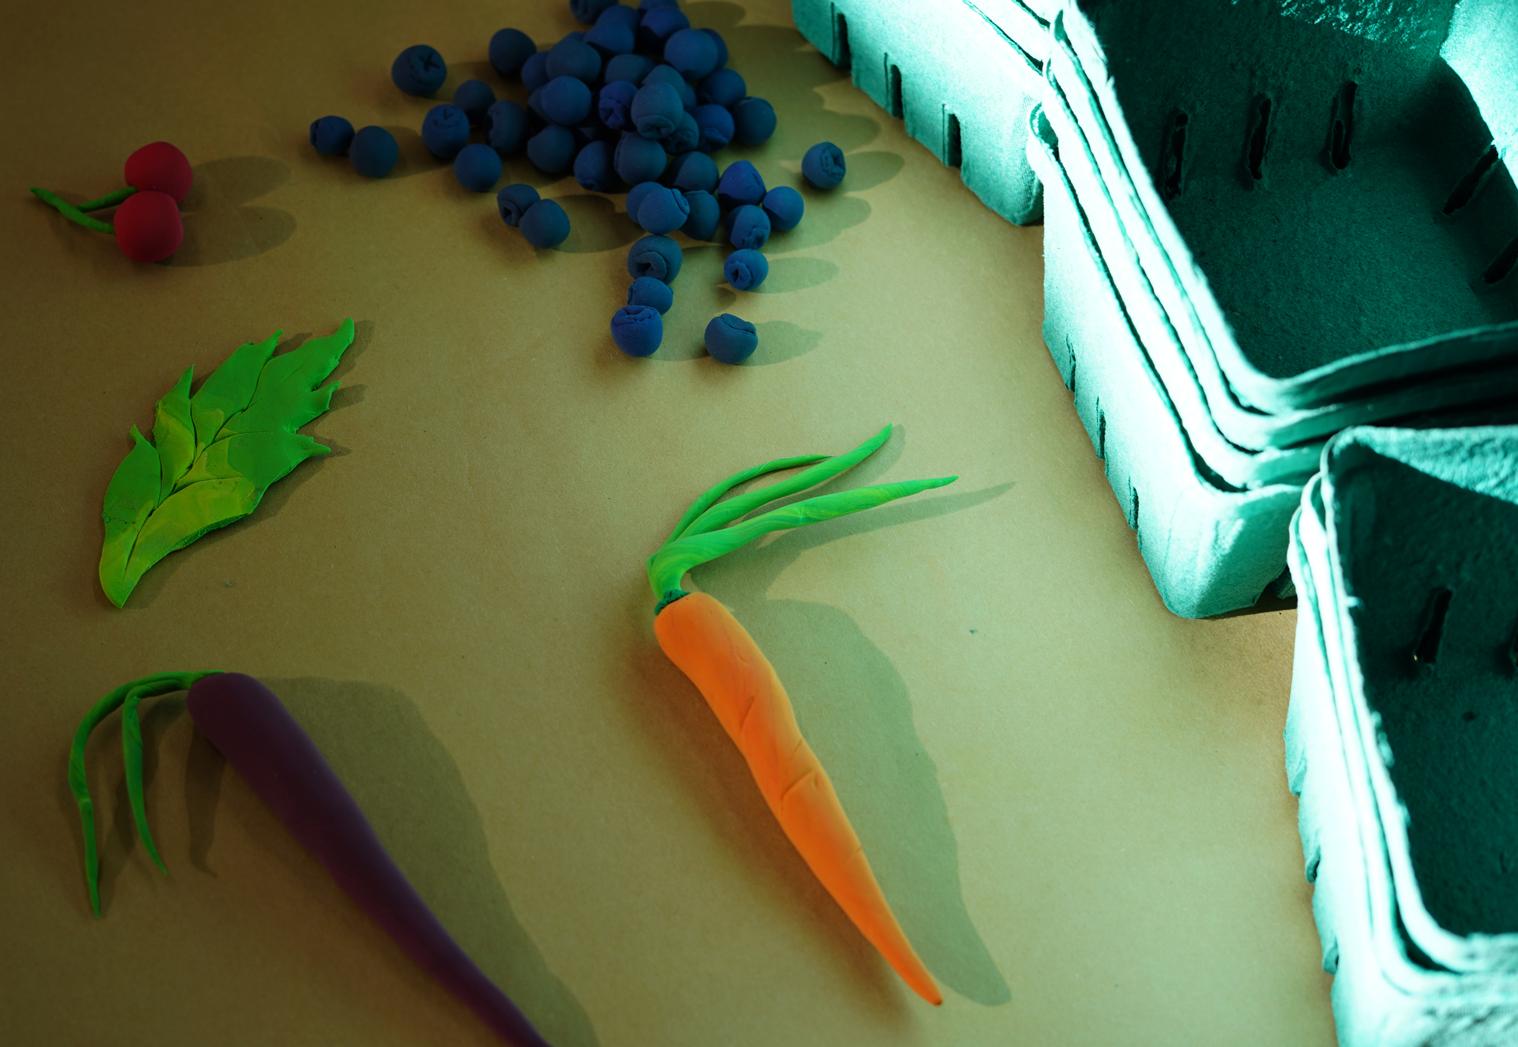 Photo of fruits and vegetables made of modeling clay on a table beside green molded pulp berry baskets